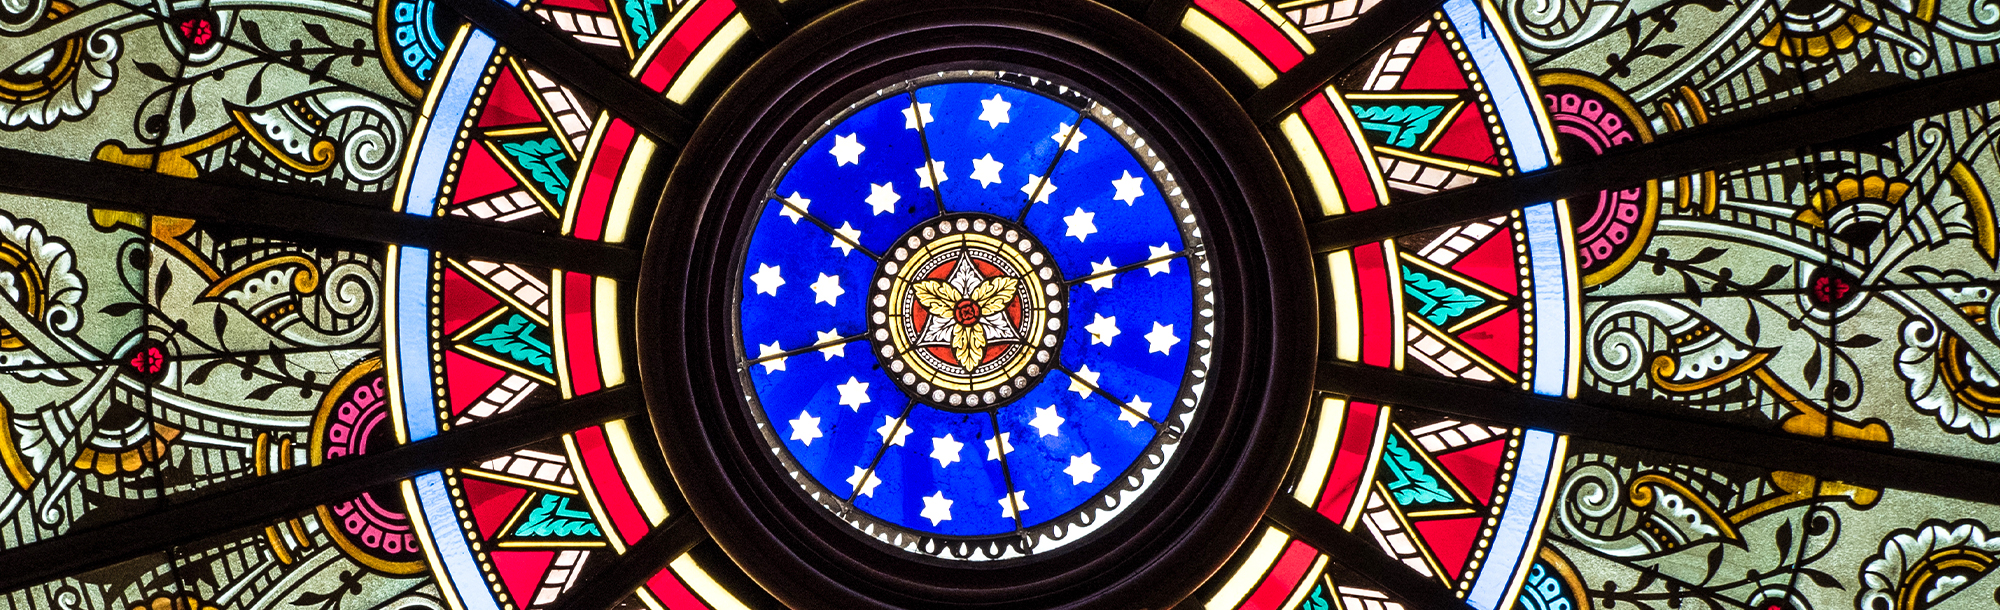 Linderman Library stained glass ceiling